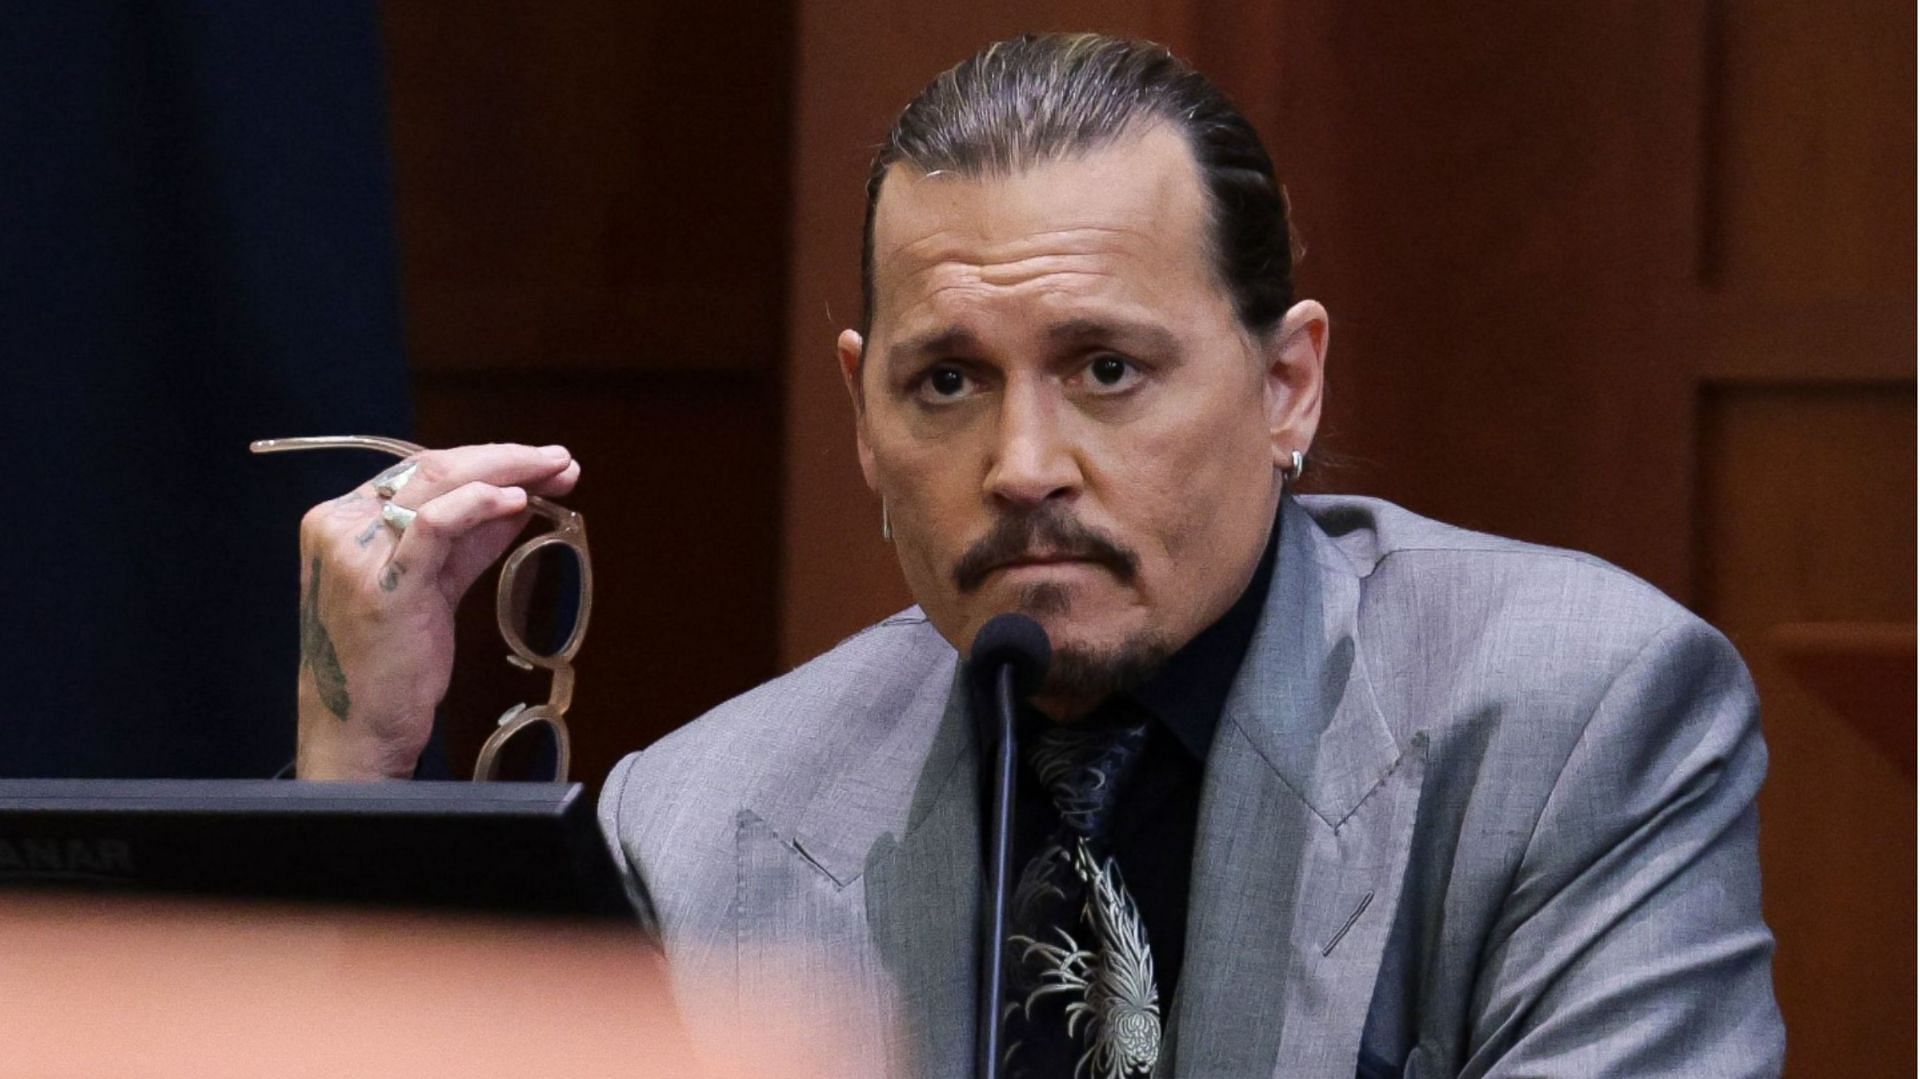 Johnny Depp asked ACLU to provide documents for his high-profile defamation trial against ex-wife Amber Heard (Image via Getty Images/Evelyn Hockstein)